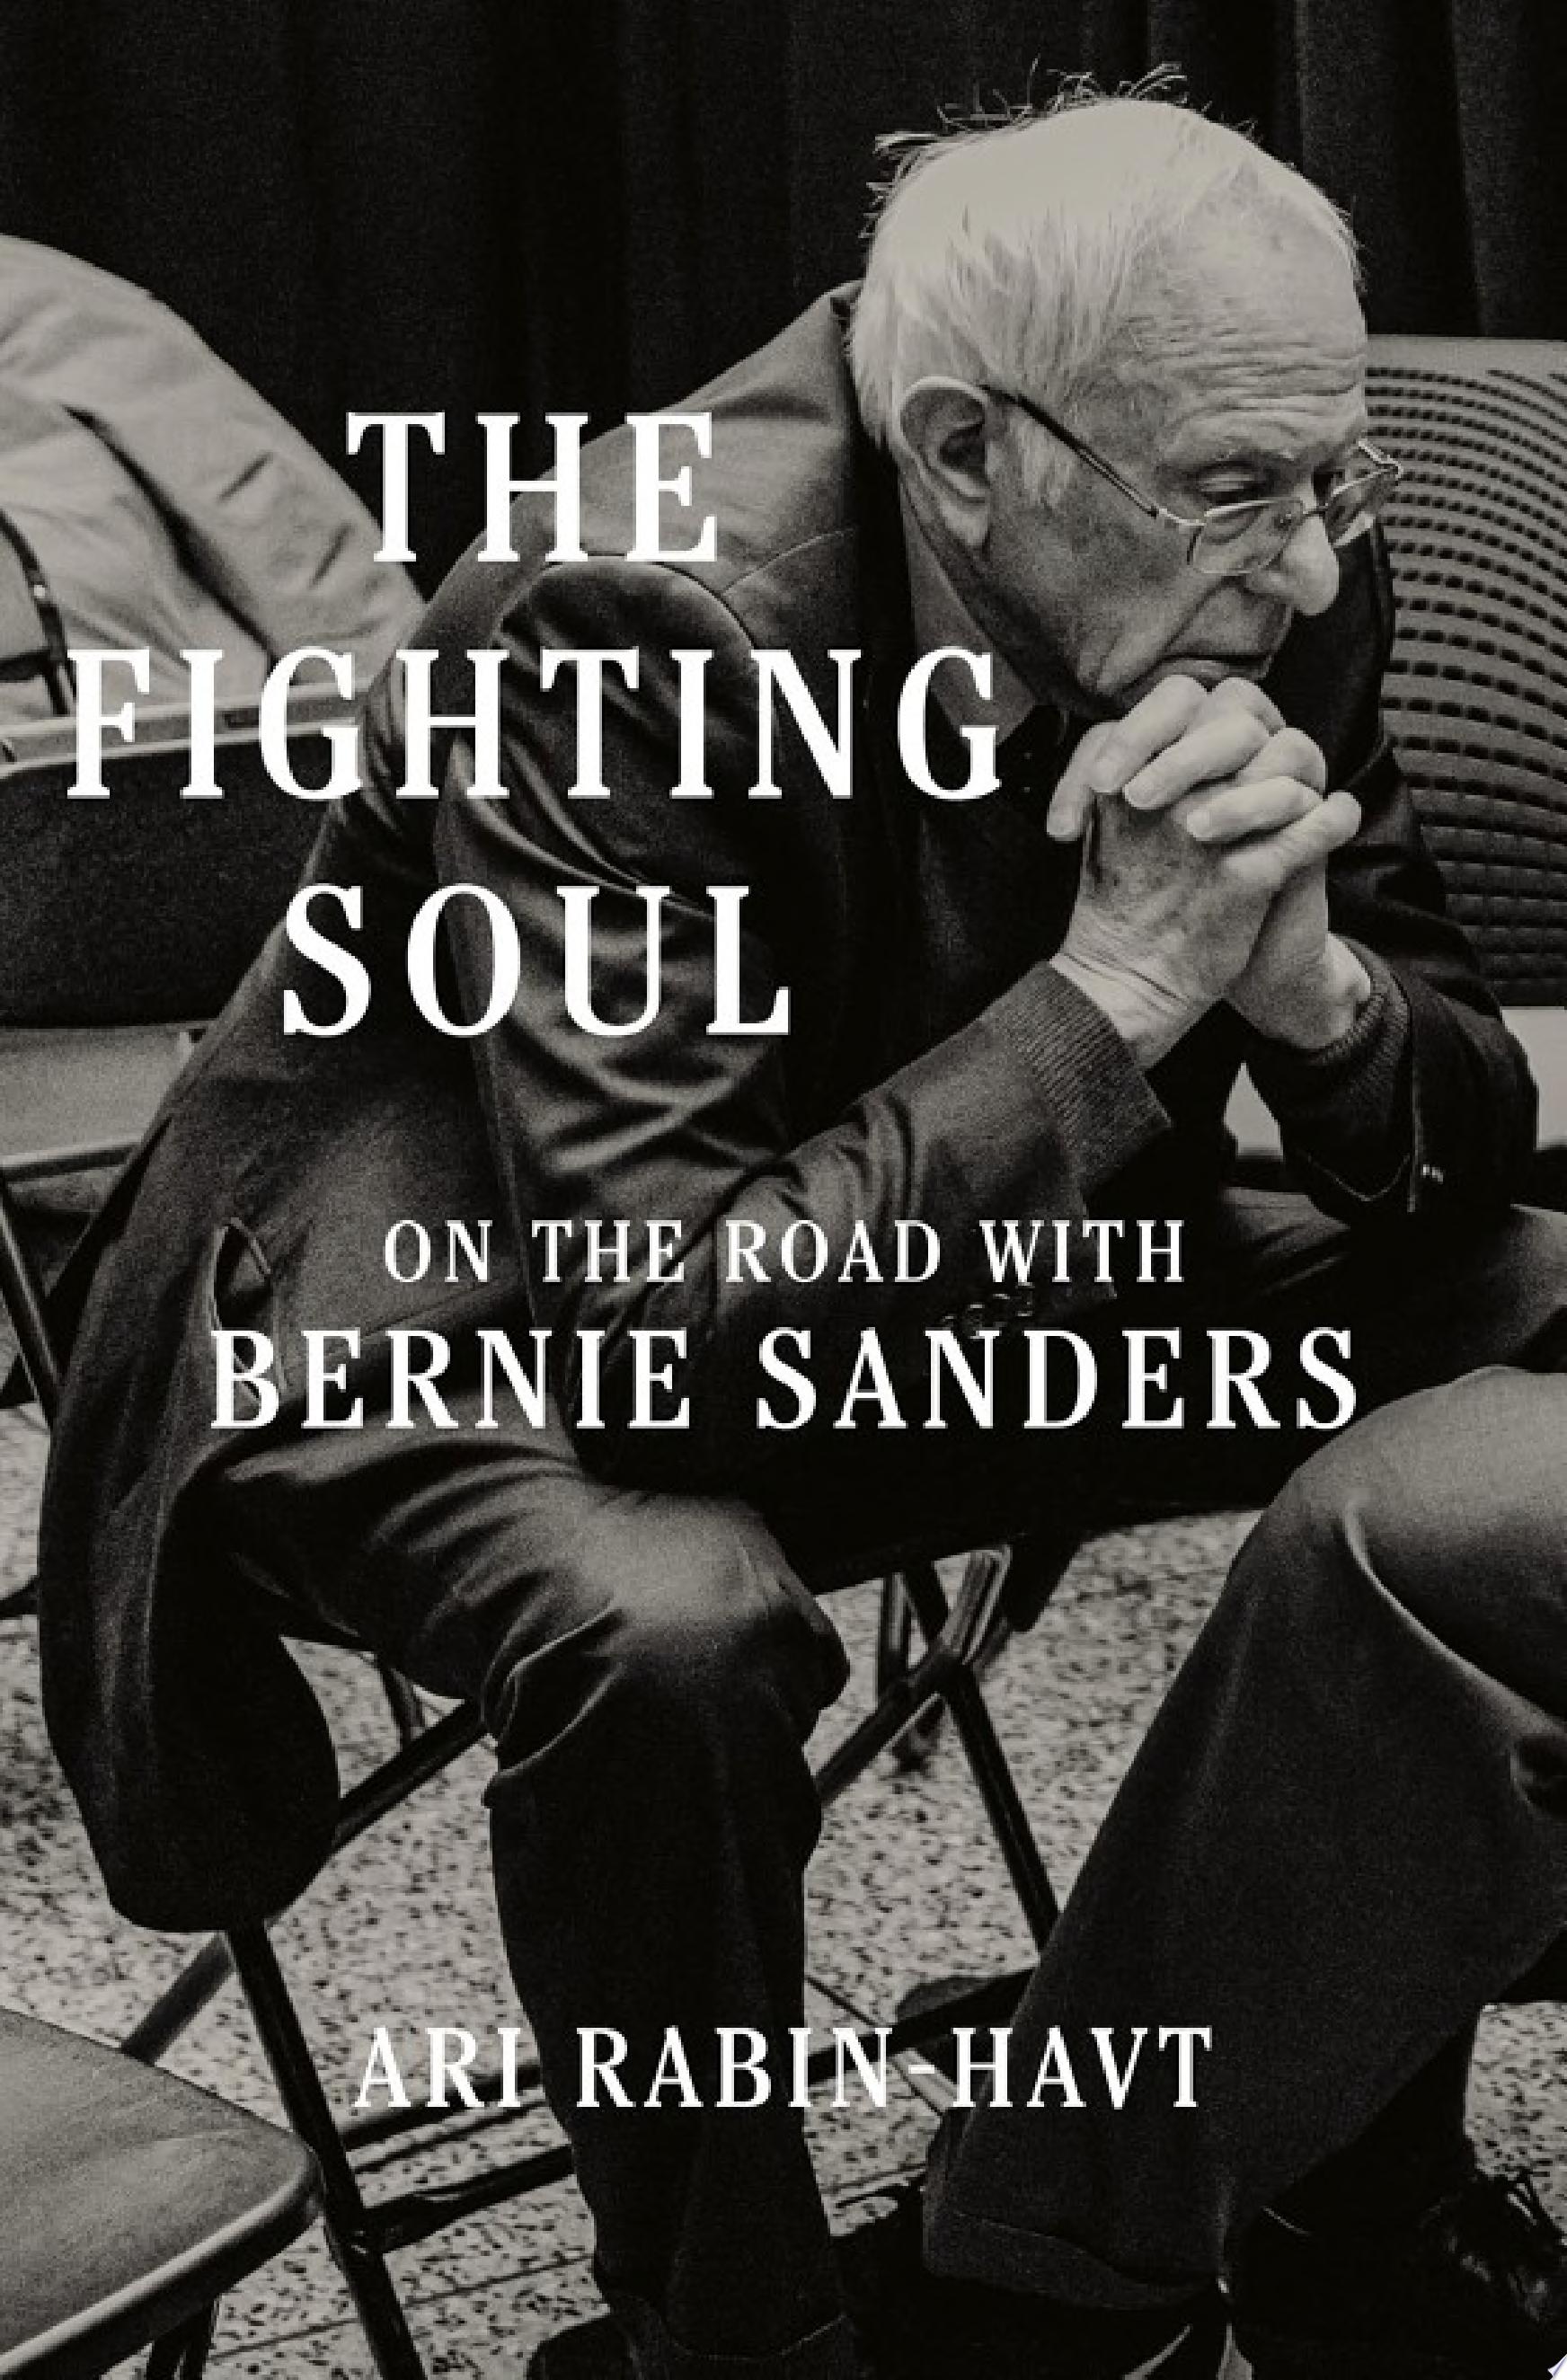 Image for "The Fighting Soul: On the Road with Bernie Sanders"